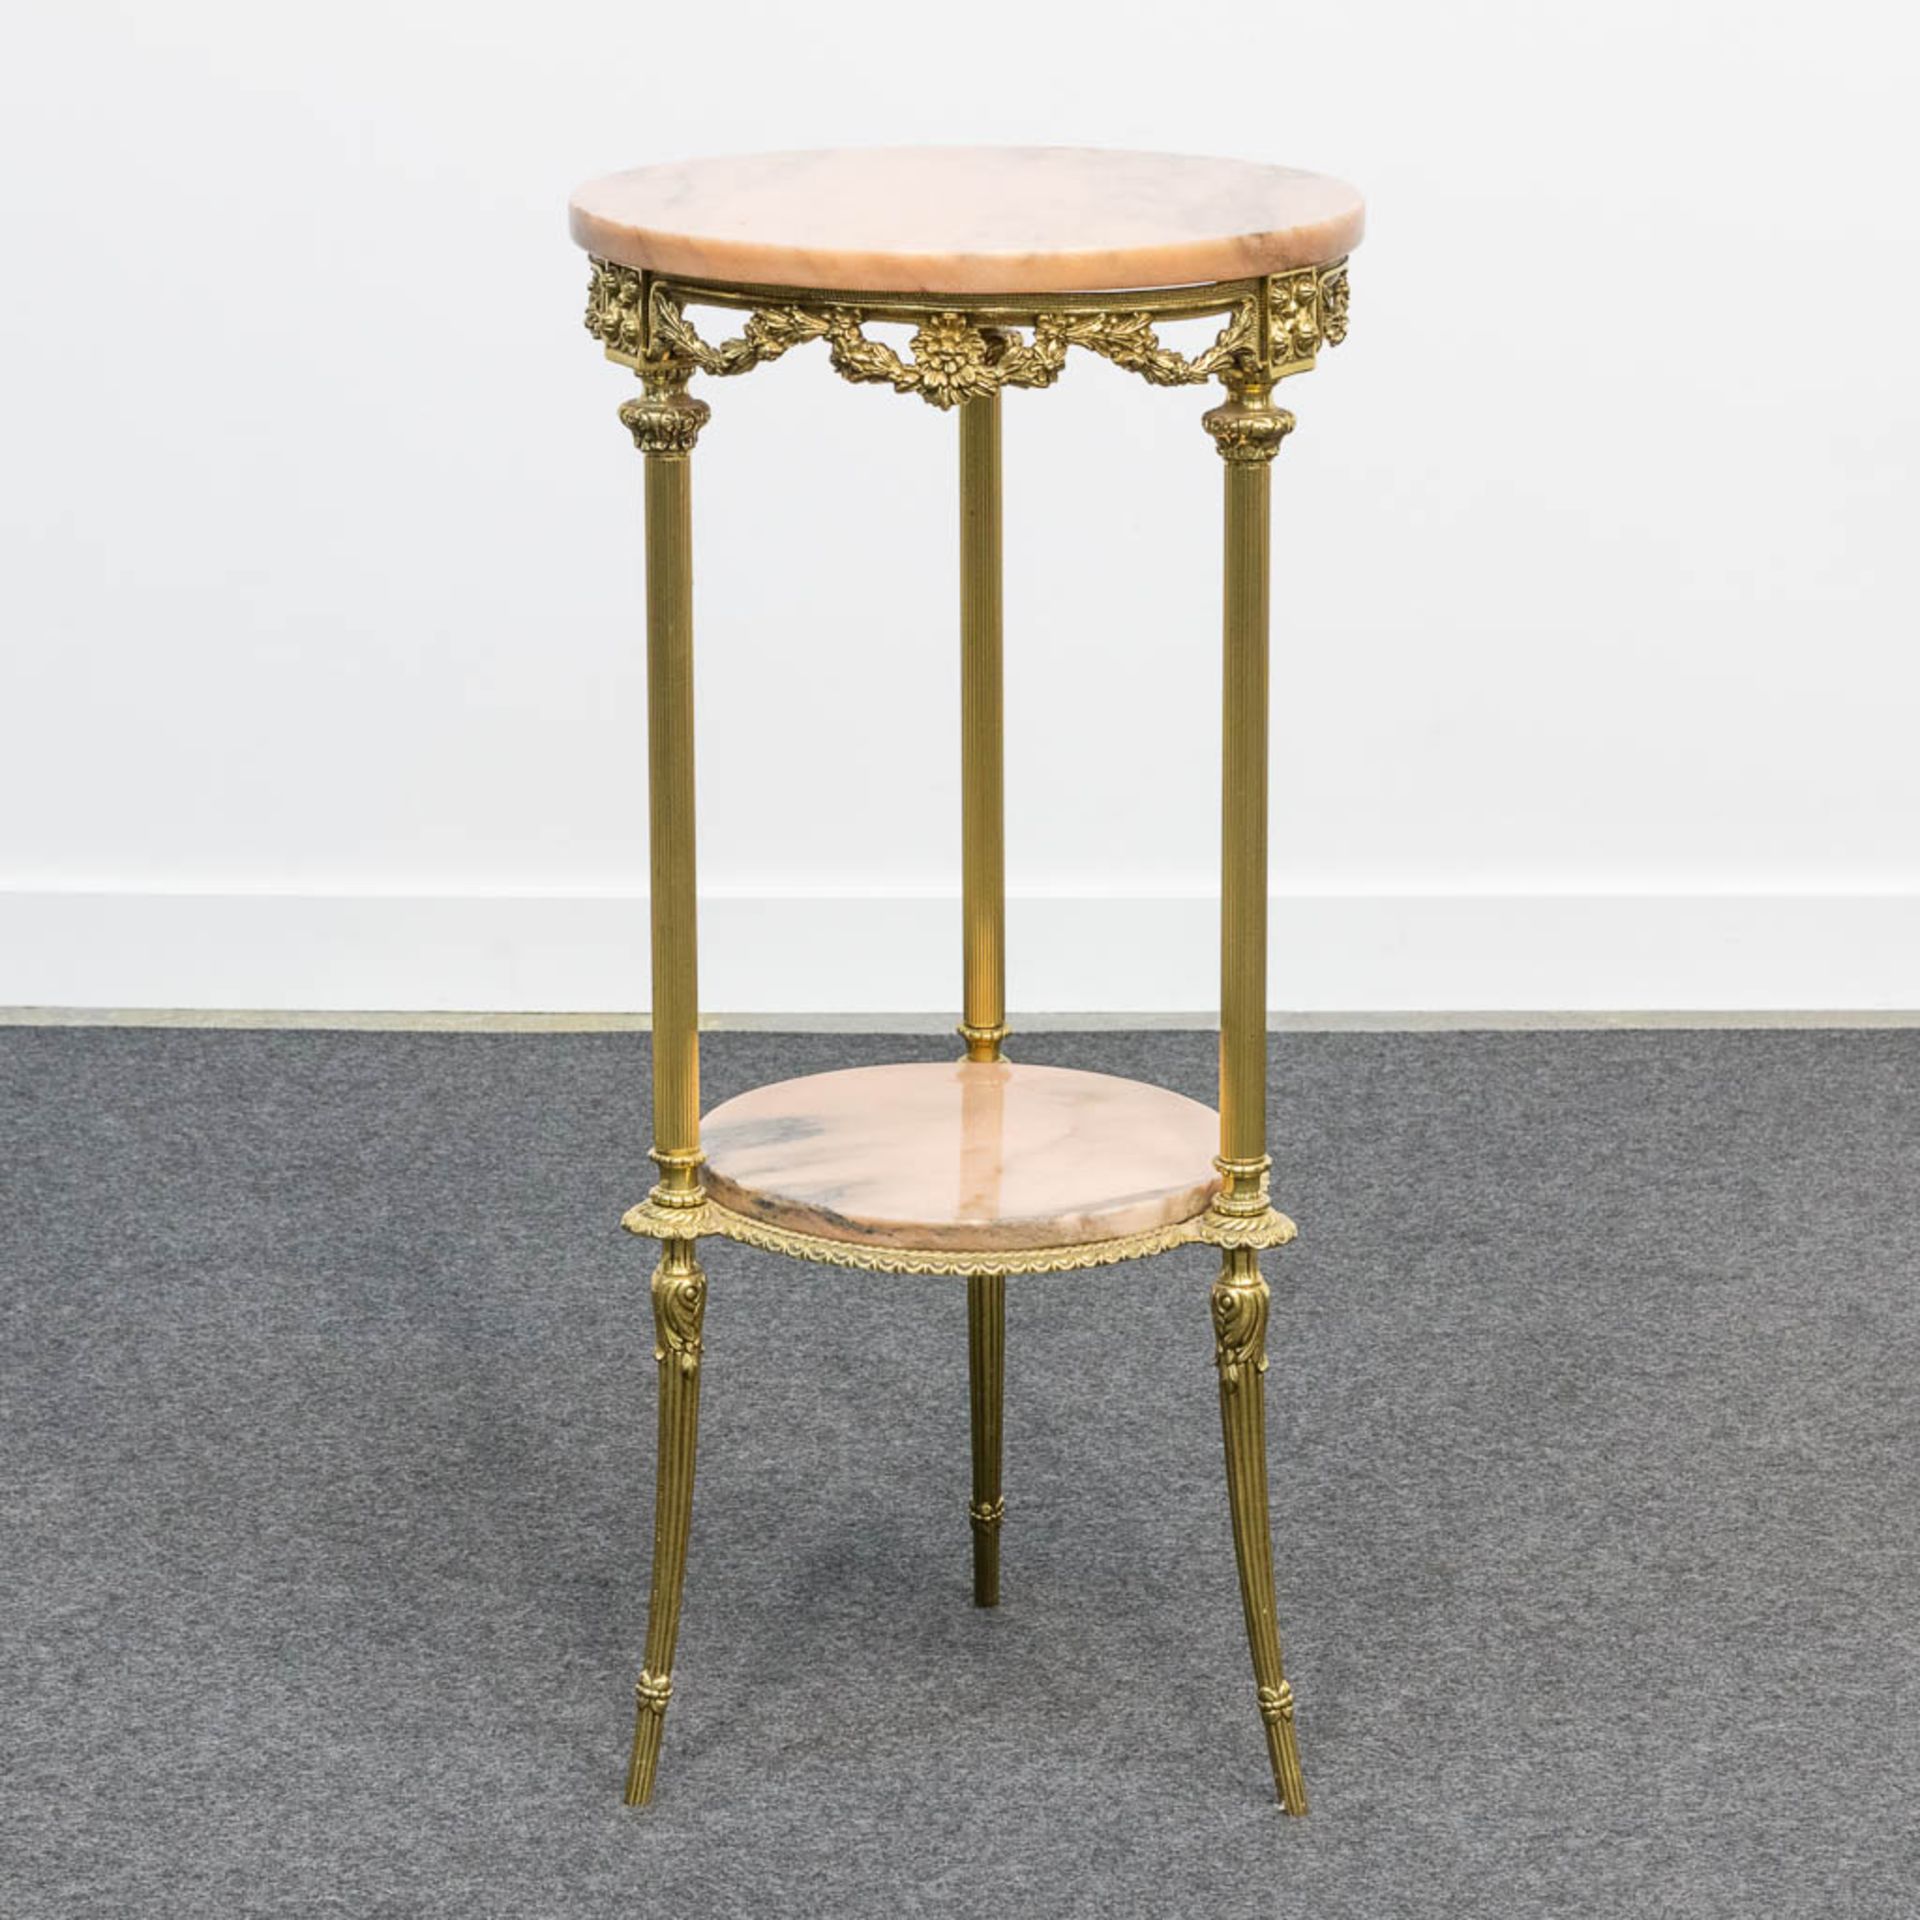 A two-tier side table made of bronze and with pink marble tops. (72 x 34,5 cm) - Bild 6 aus 12